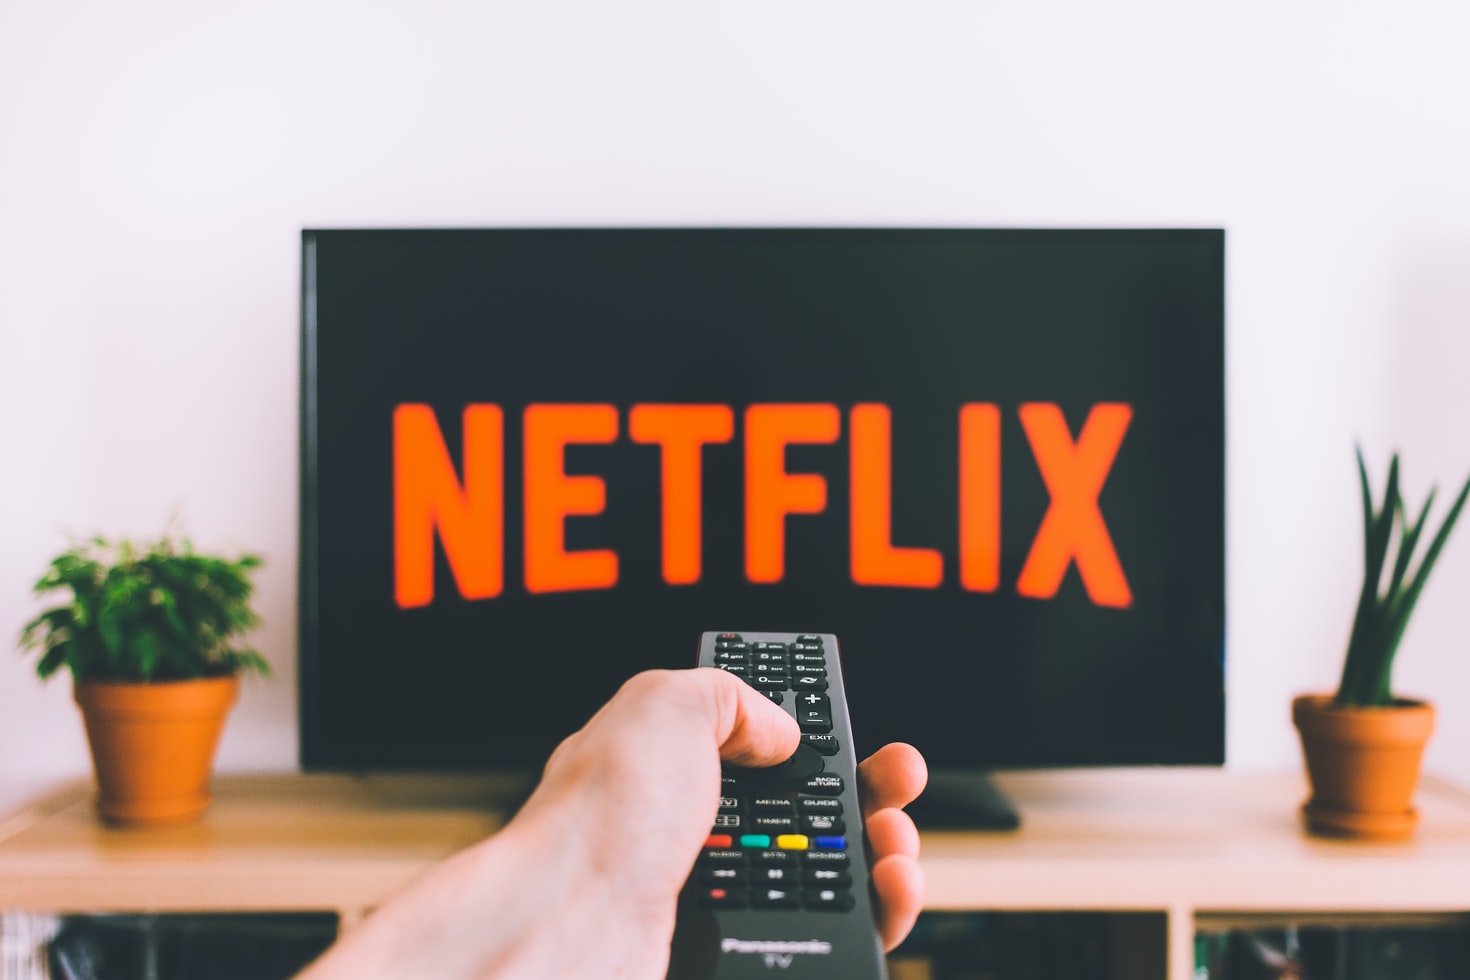 Netflix raises its prices again in the US and Canada